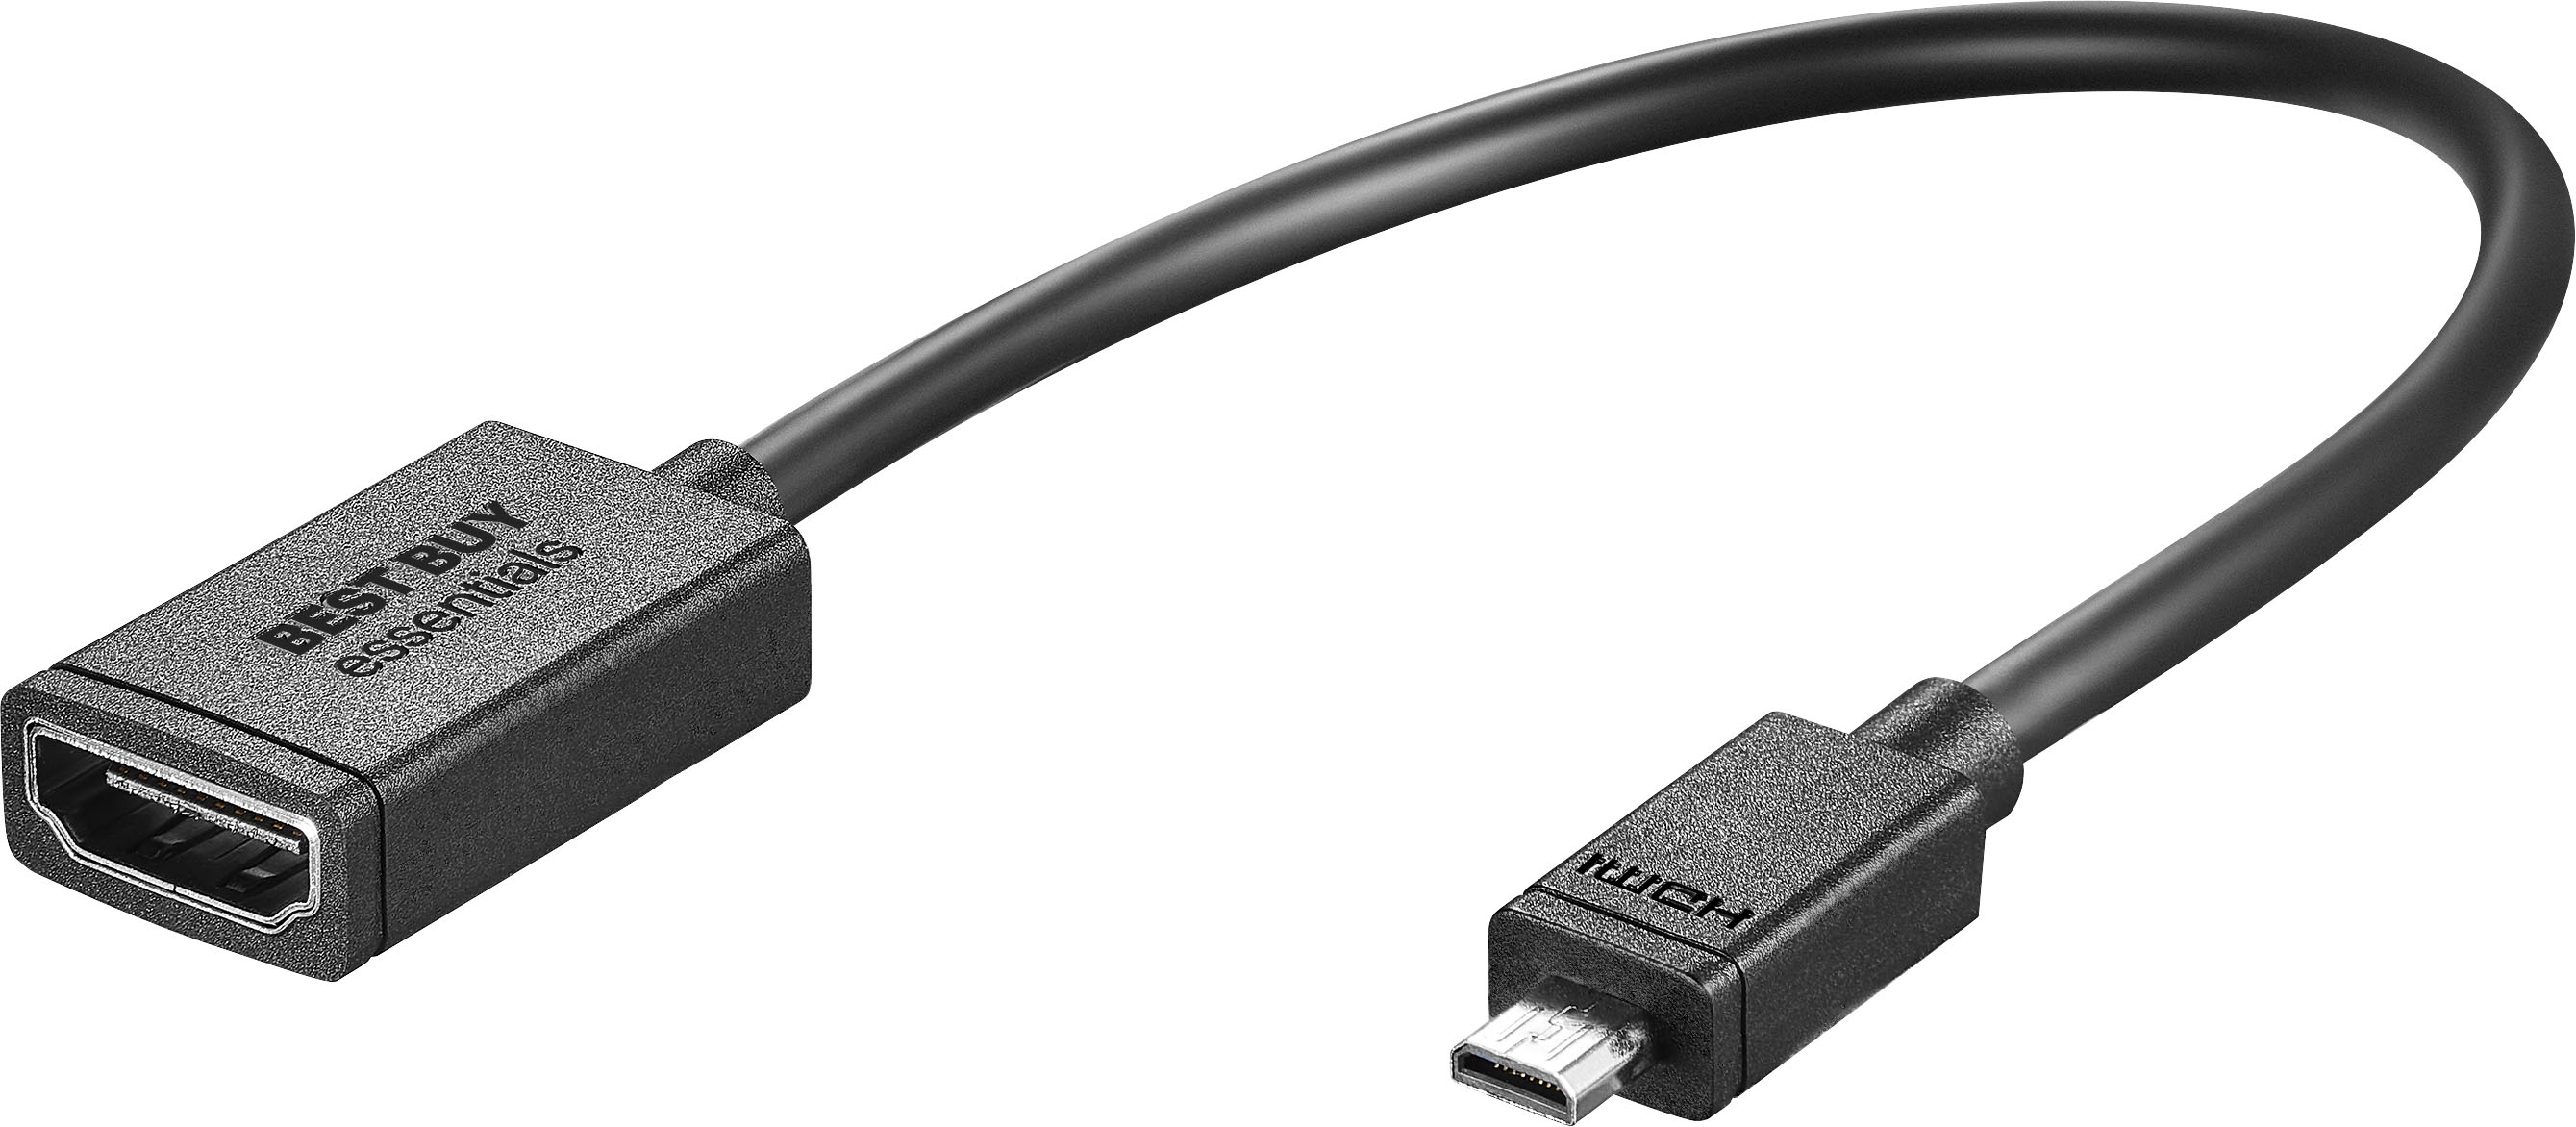 Best Buy: Best Buy essentials™ Micro HDMI to HDMI Adapter Black BE-HCL306